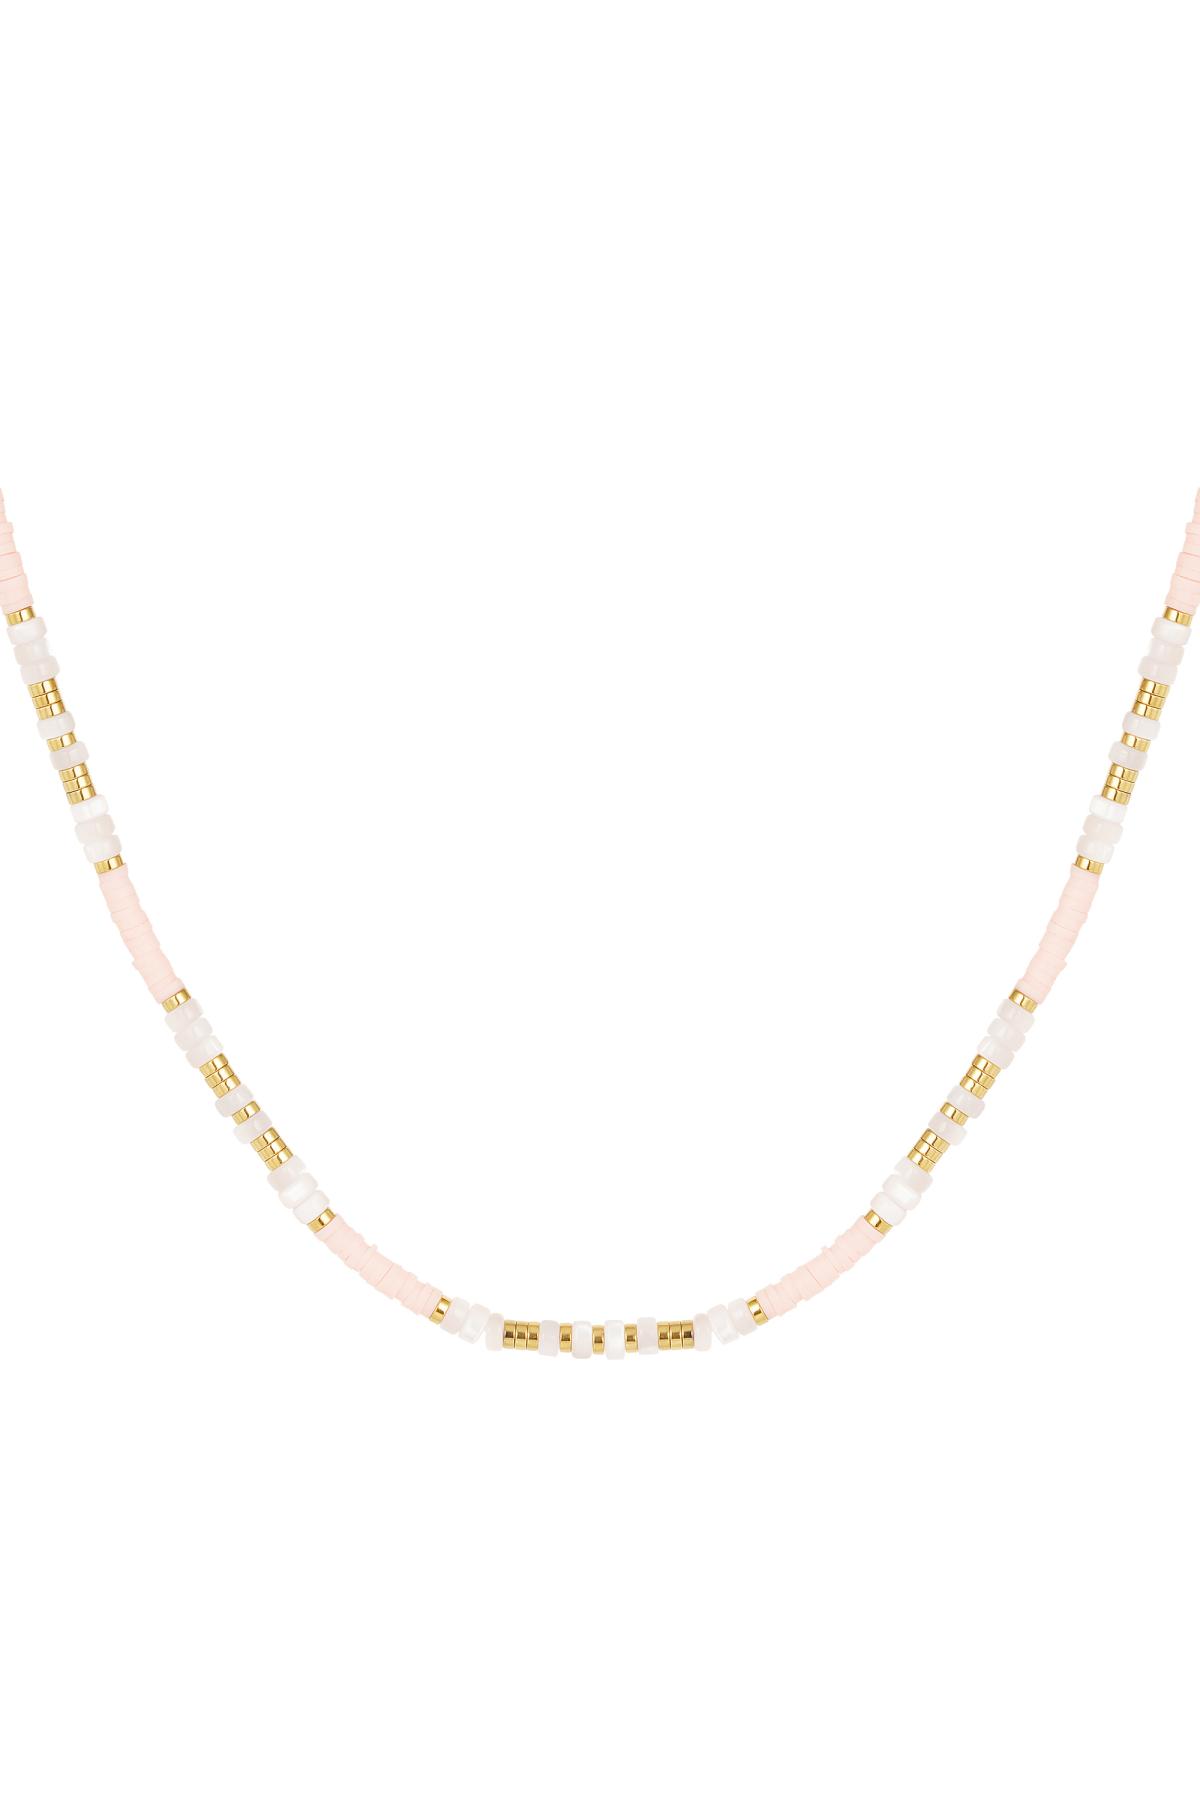 Bead chain color Pale Pink Hematite